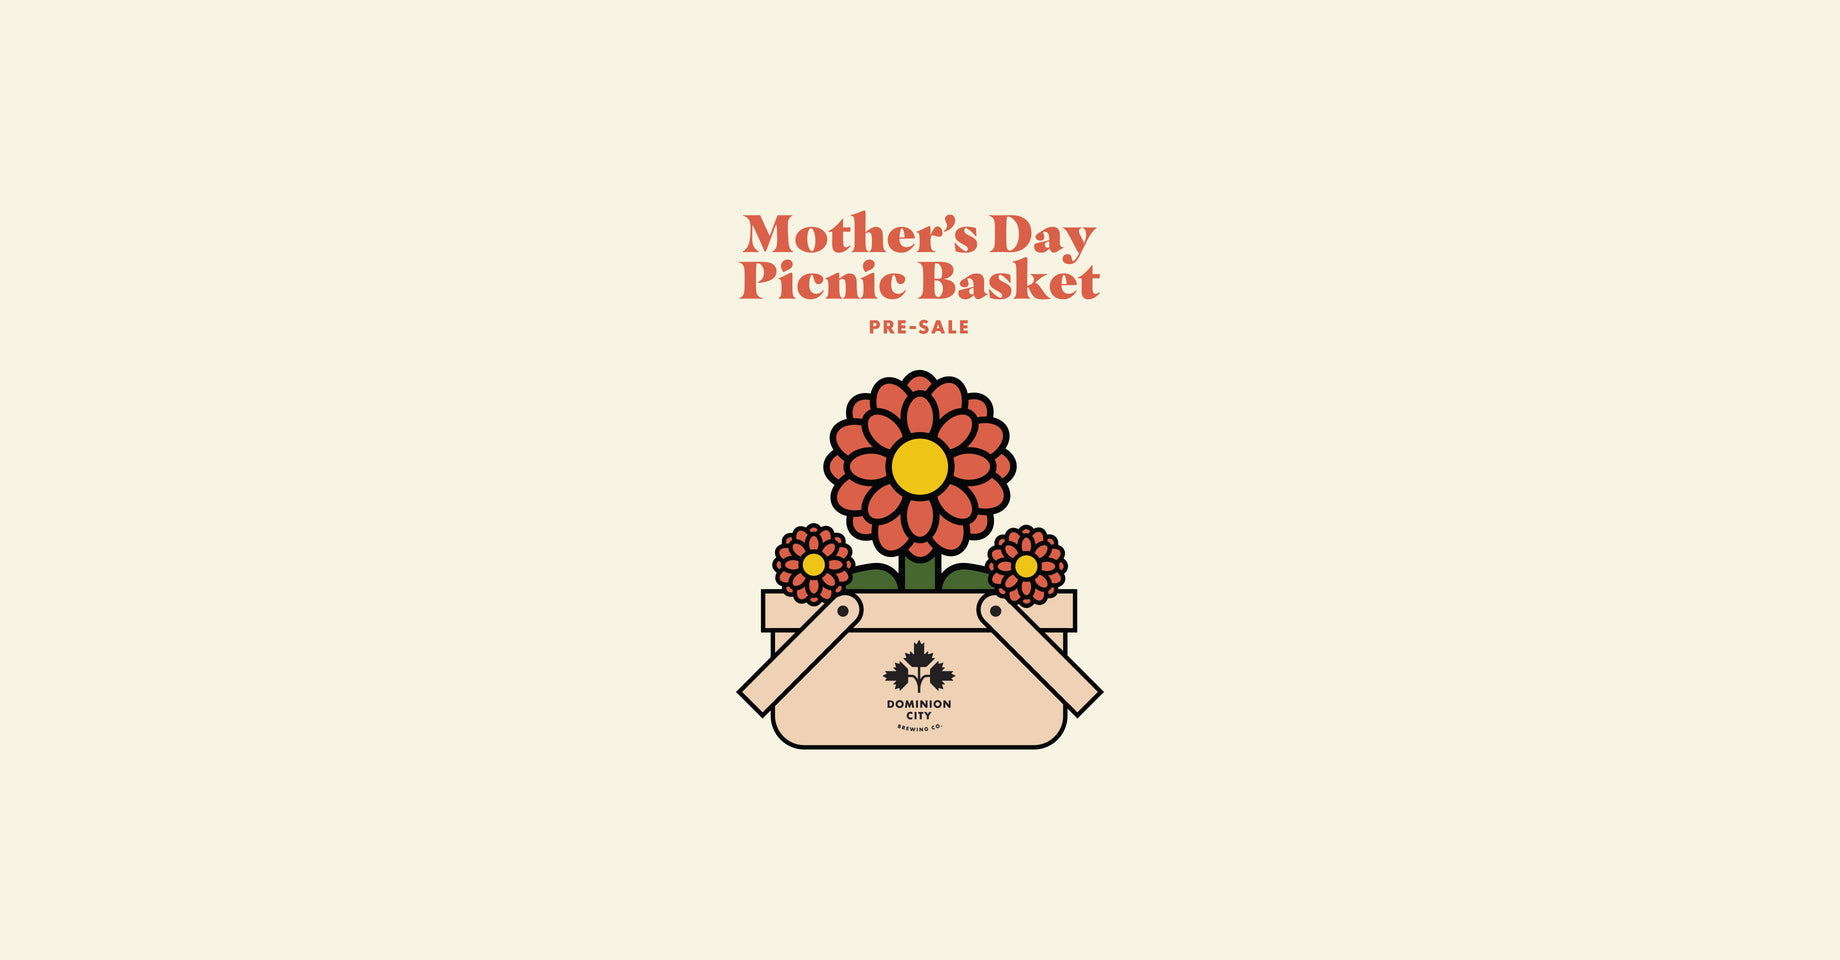 SOLD OUT! Mother's Day Picnic Basket